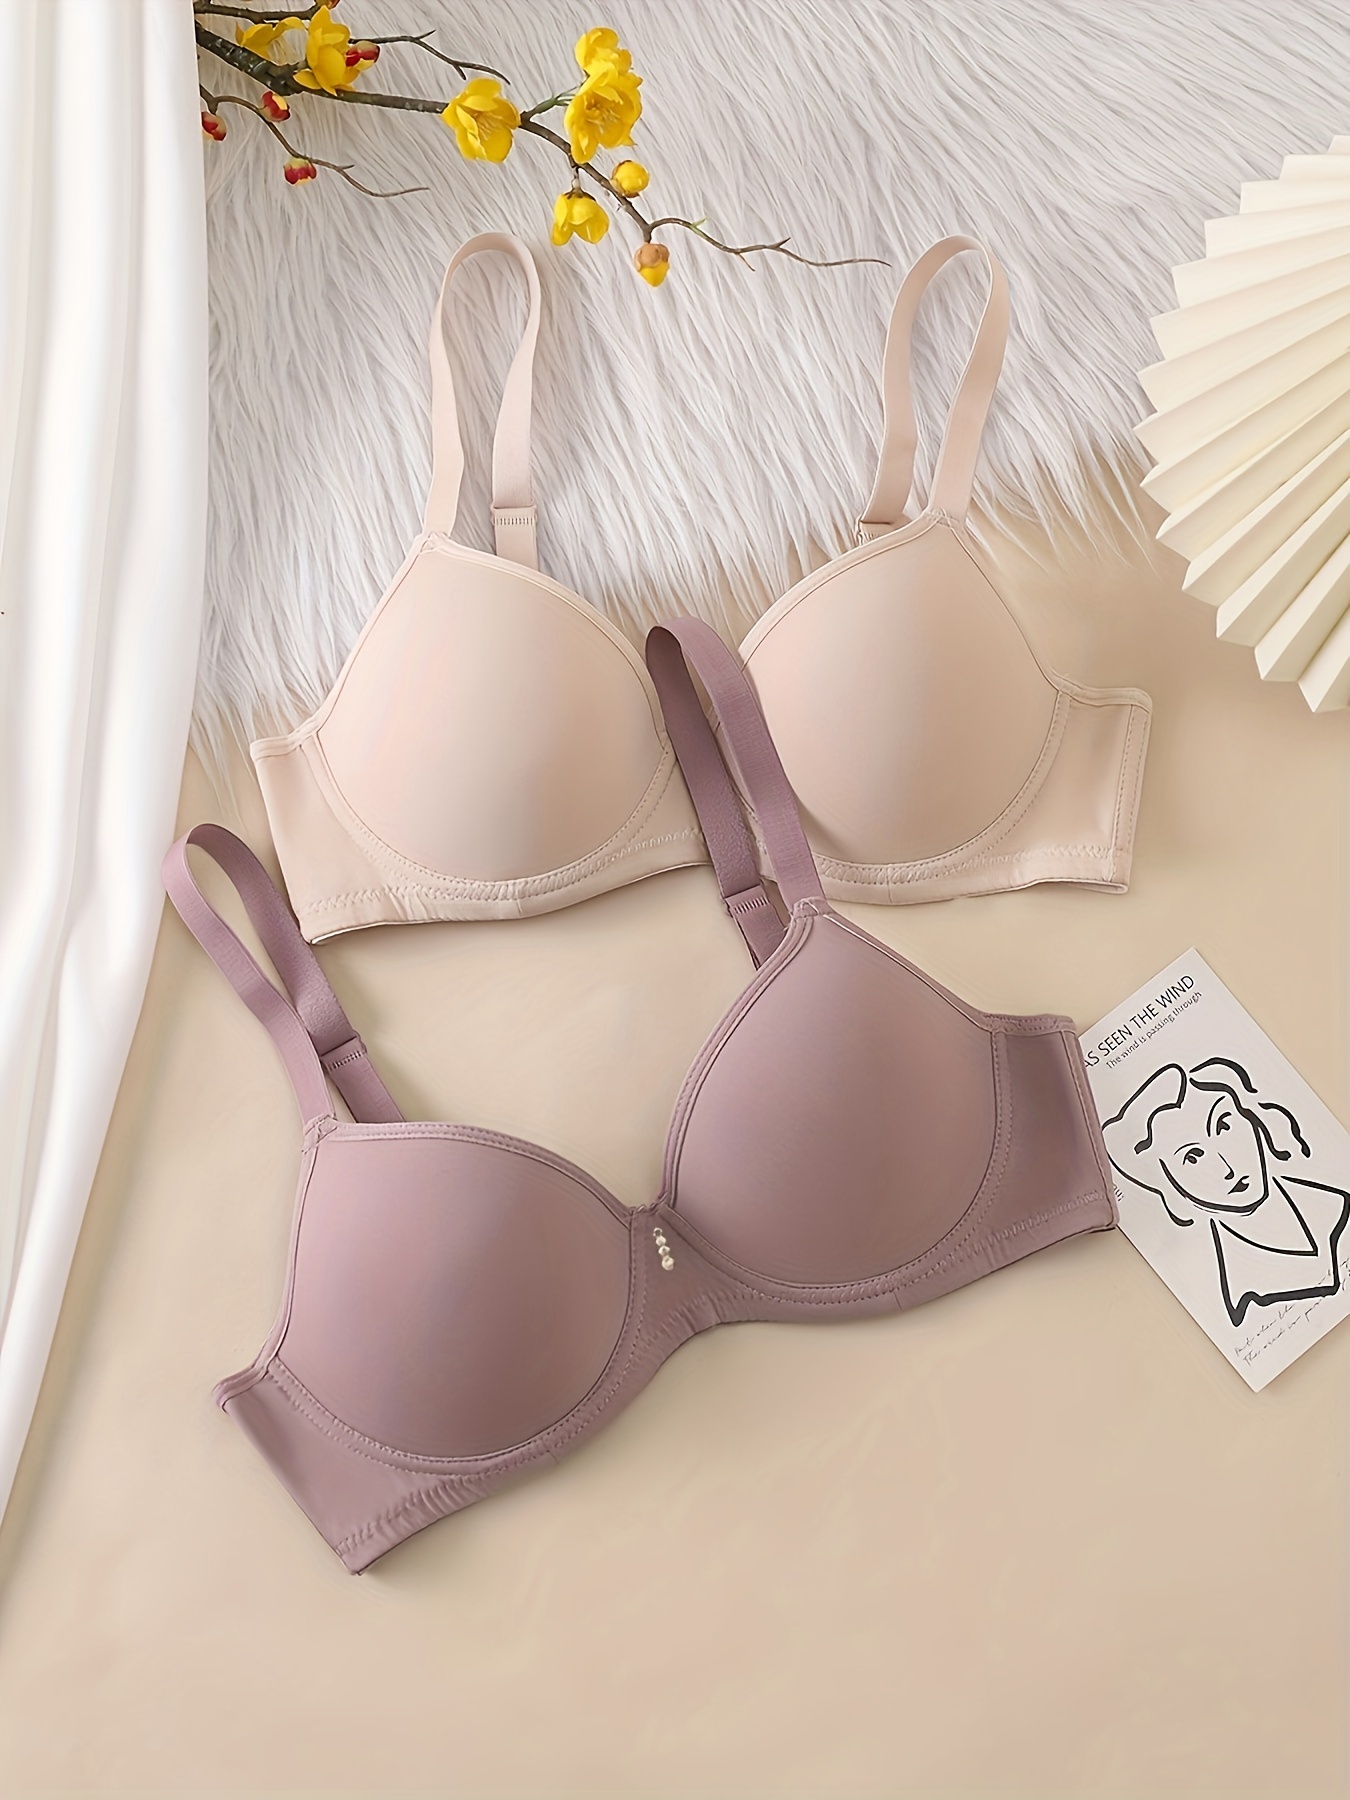 Something casual on the - Sorella Lingerie Malaysia